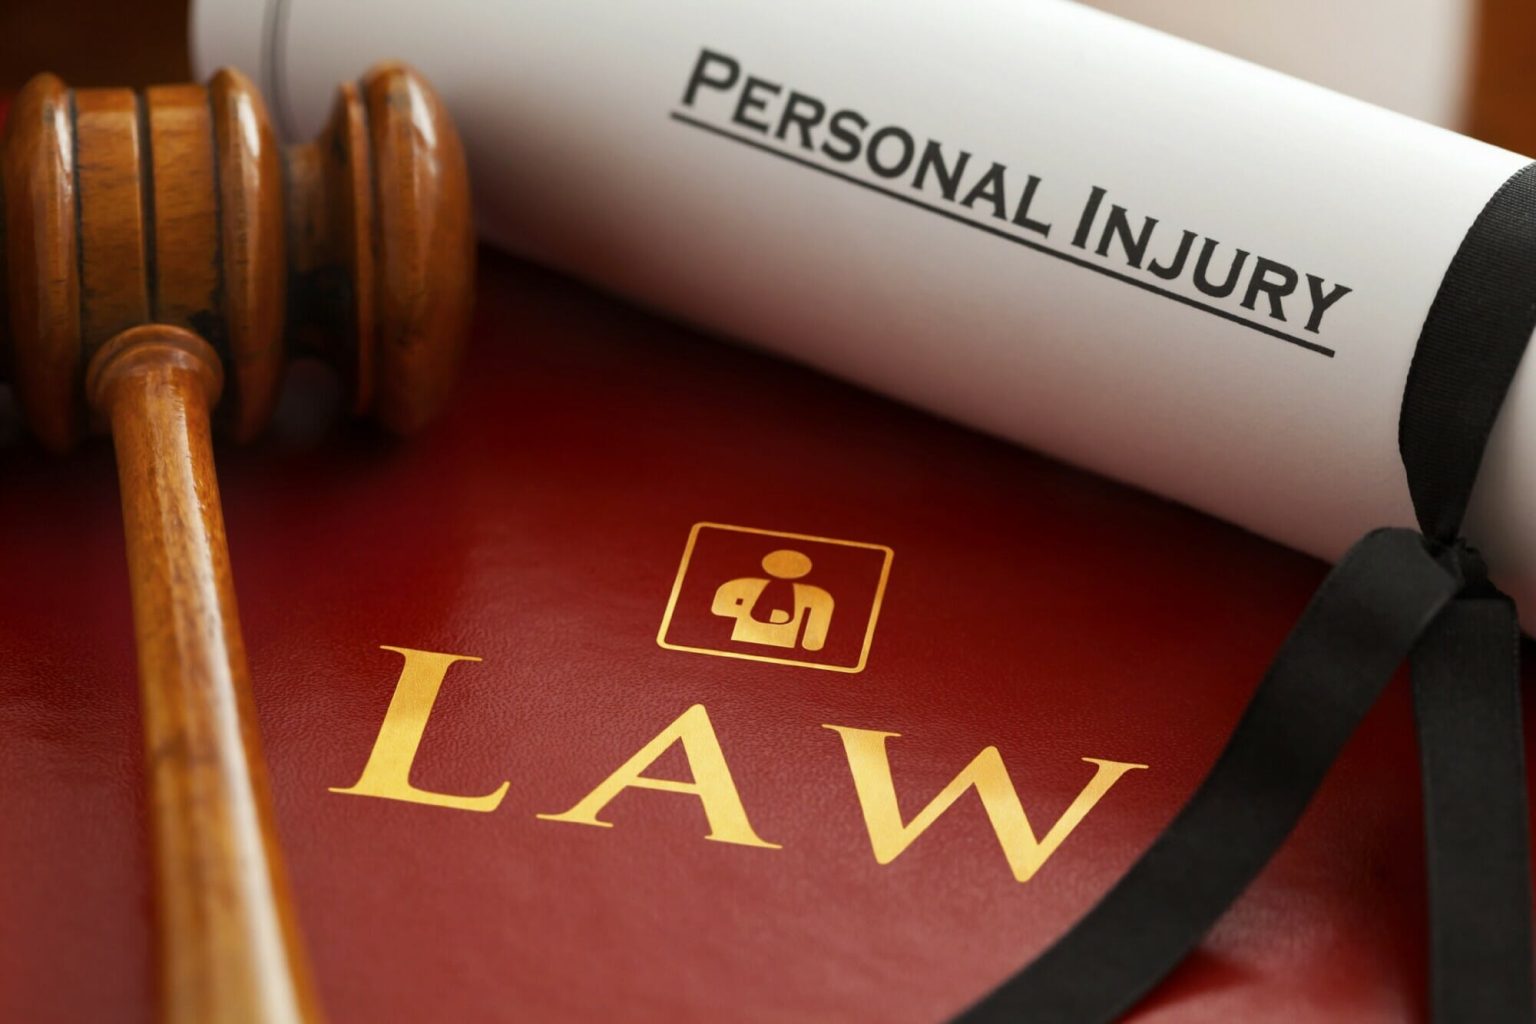 Personal Injury Law Image